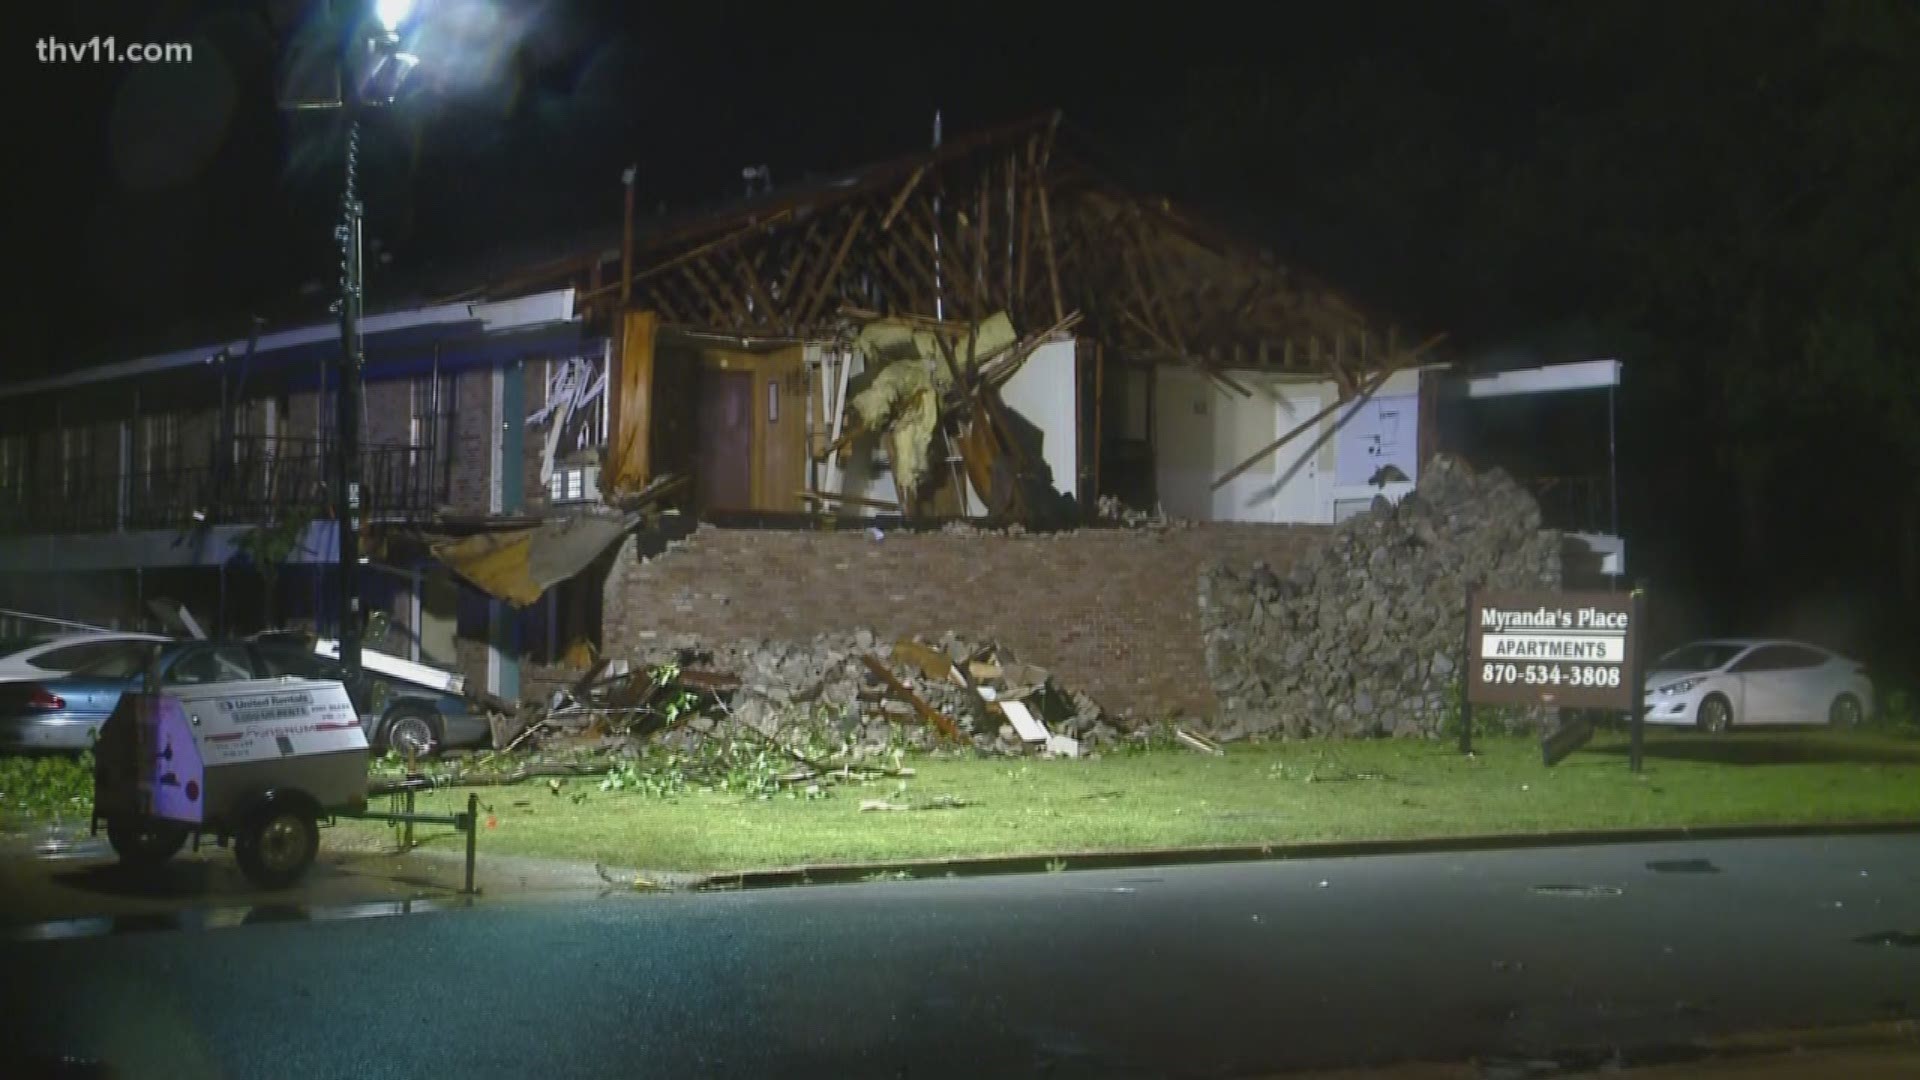 Storm damage displaces people in Pine Bluff.